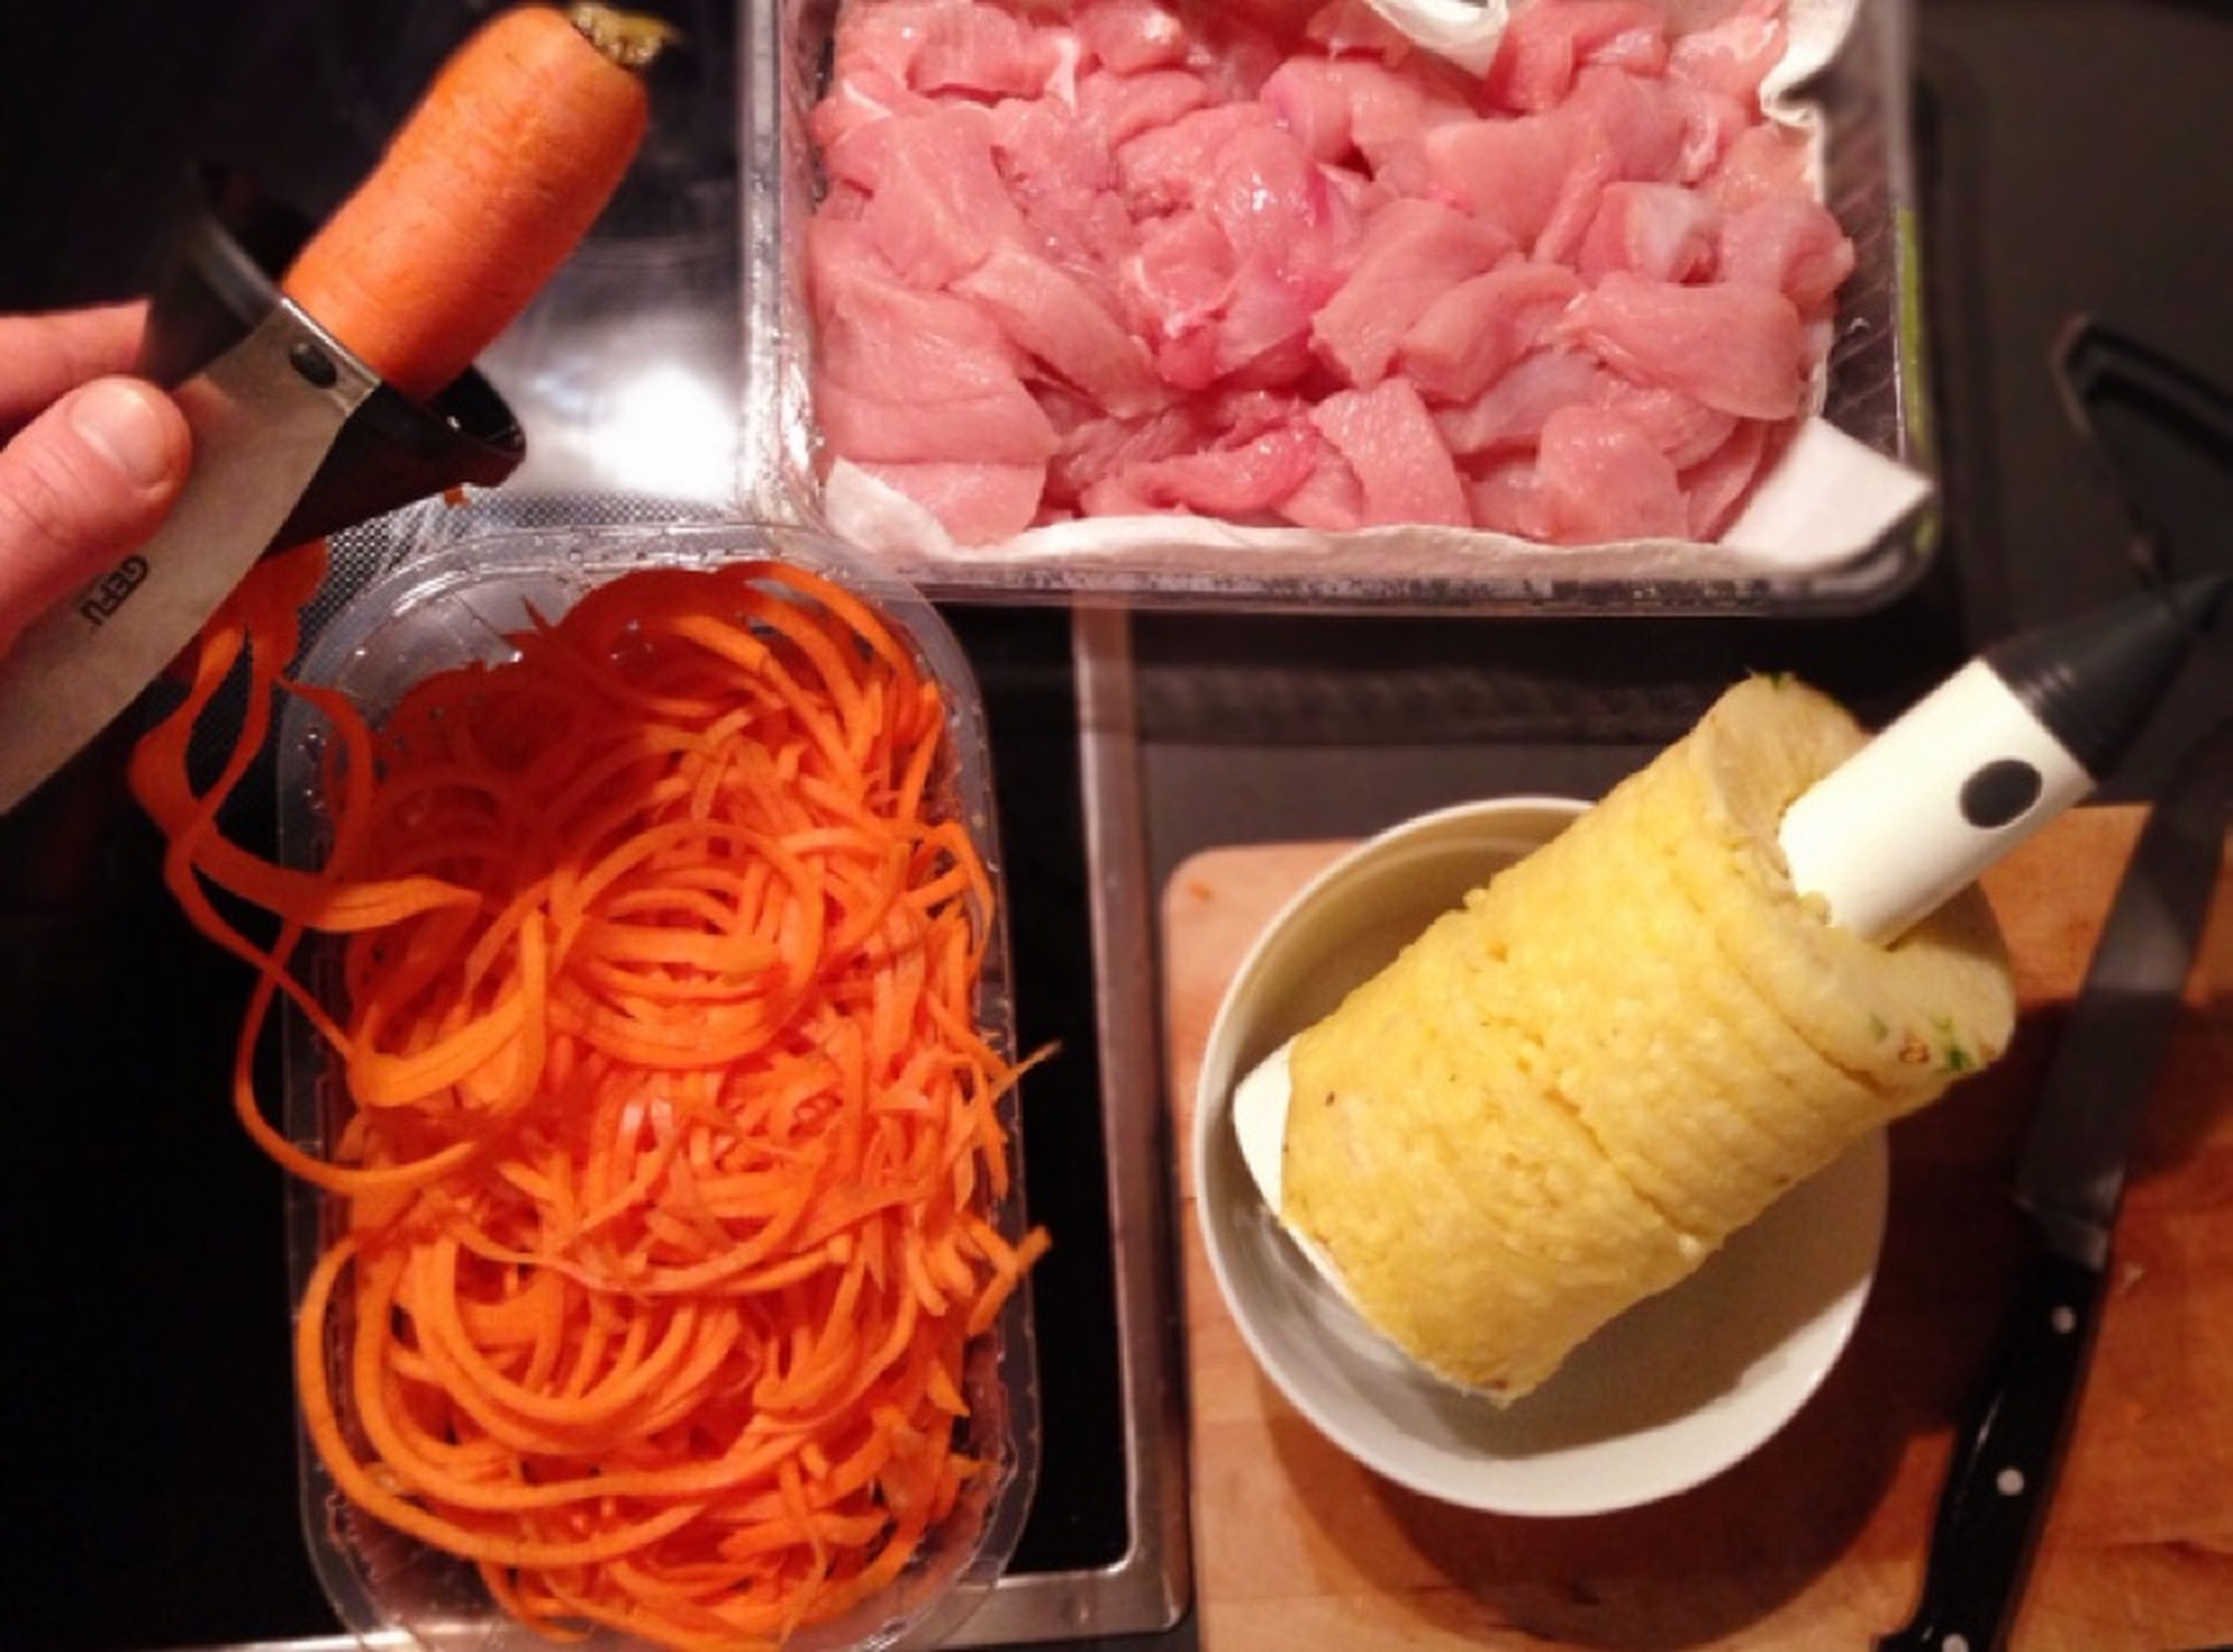 Pat turkey breast dry with paper towels, then cut into strips or small chunks. Slice carrots or use a spiralizer to make carrot spaghetti. Set some sliced carrot aside for serving. Cut pineapple into bite-sized pieces and finely chop garlic and ginger.